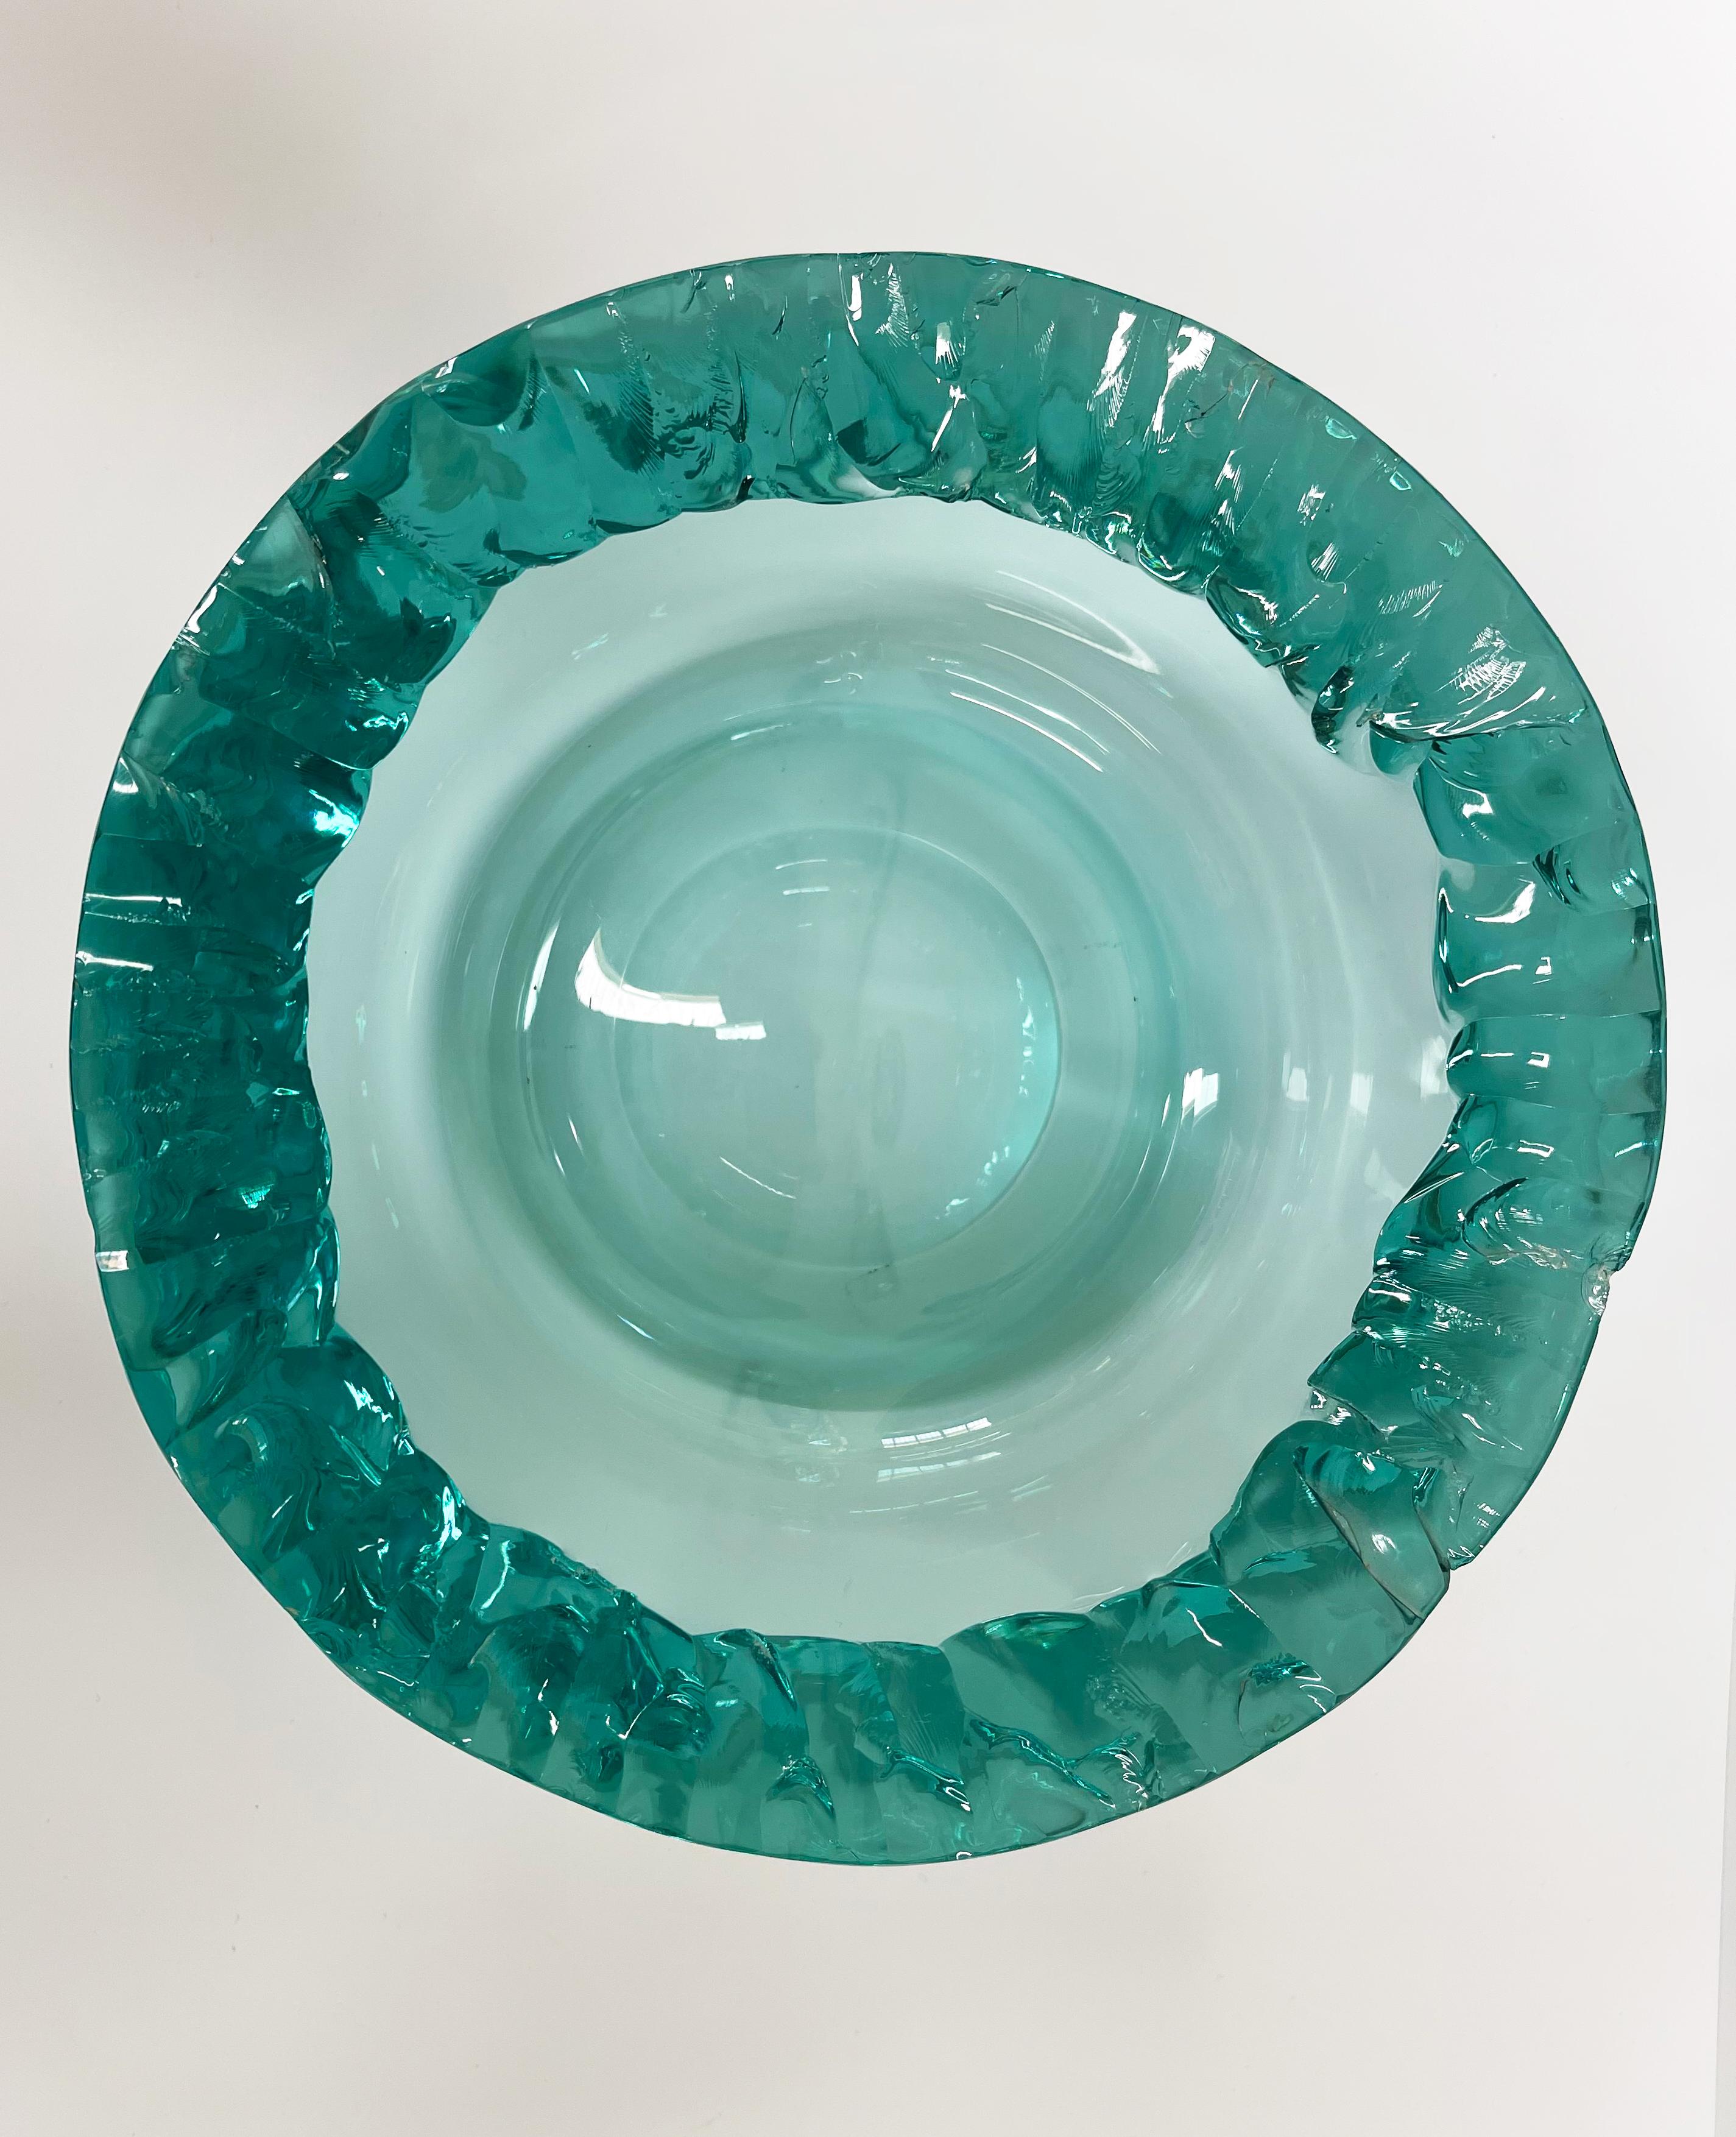 Contemporary Artistic Bowl Hand Crafted Aquamarine Crystal by Ghirò Studio In New Condition For Sale In Pieve Emanuele, Milano